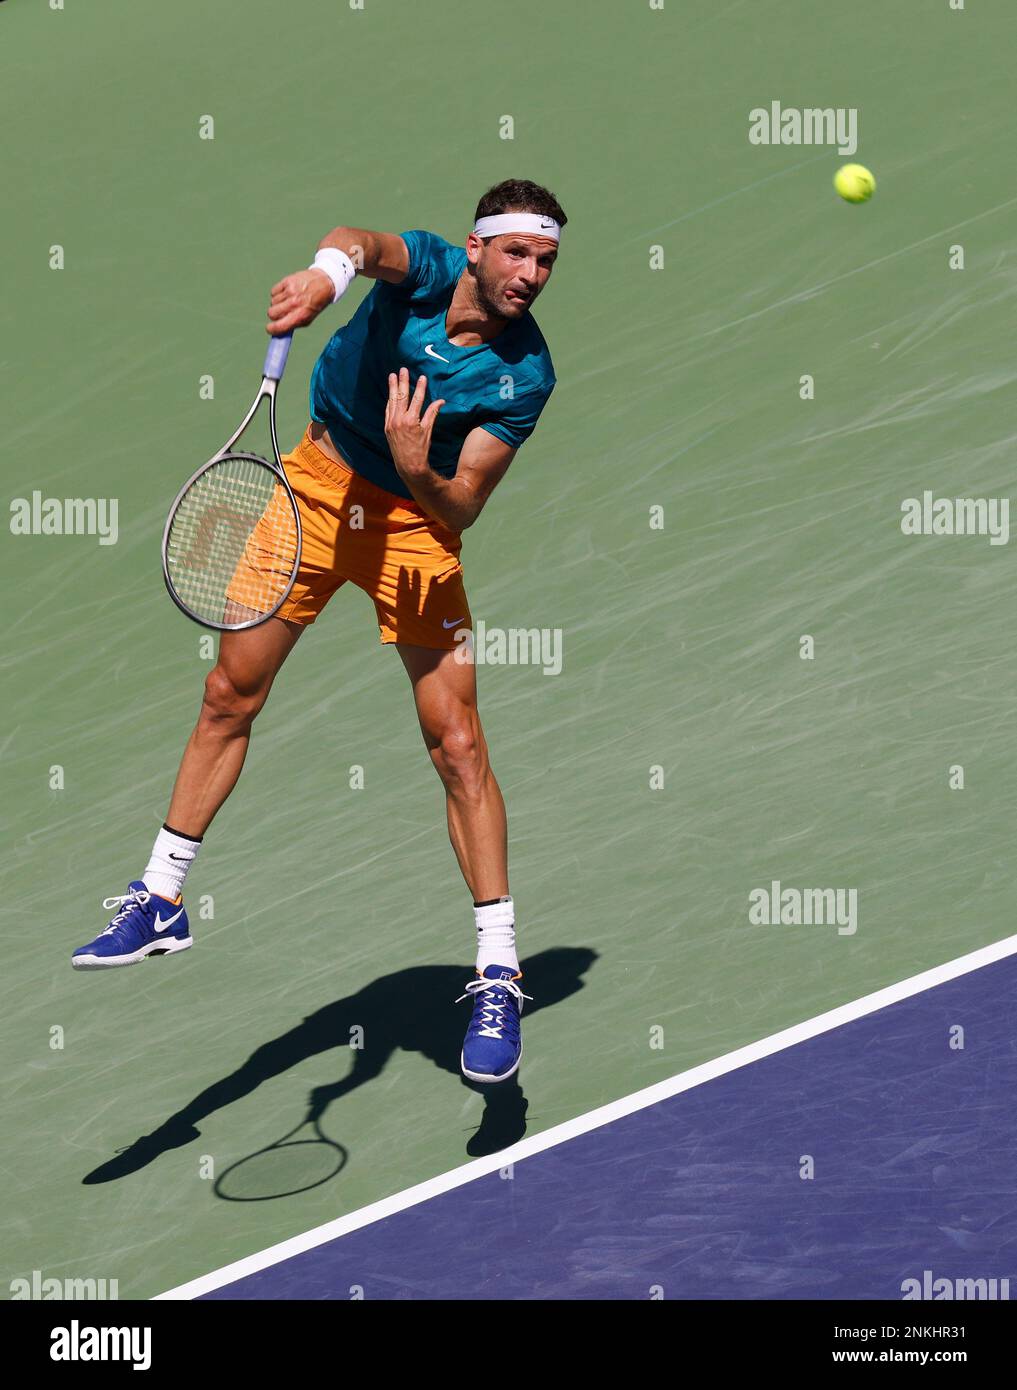 March 18, 2022 Grigor Dimitrov of Bulgaria serves against Andrey Rublev of Russia in their quarterfinal match of the 2022 BNP Paribas Open at Indian Wells Tennis Garden in Indian Wells, California.